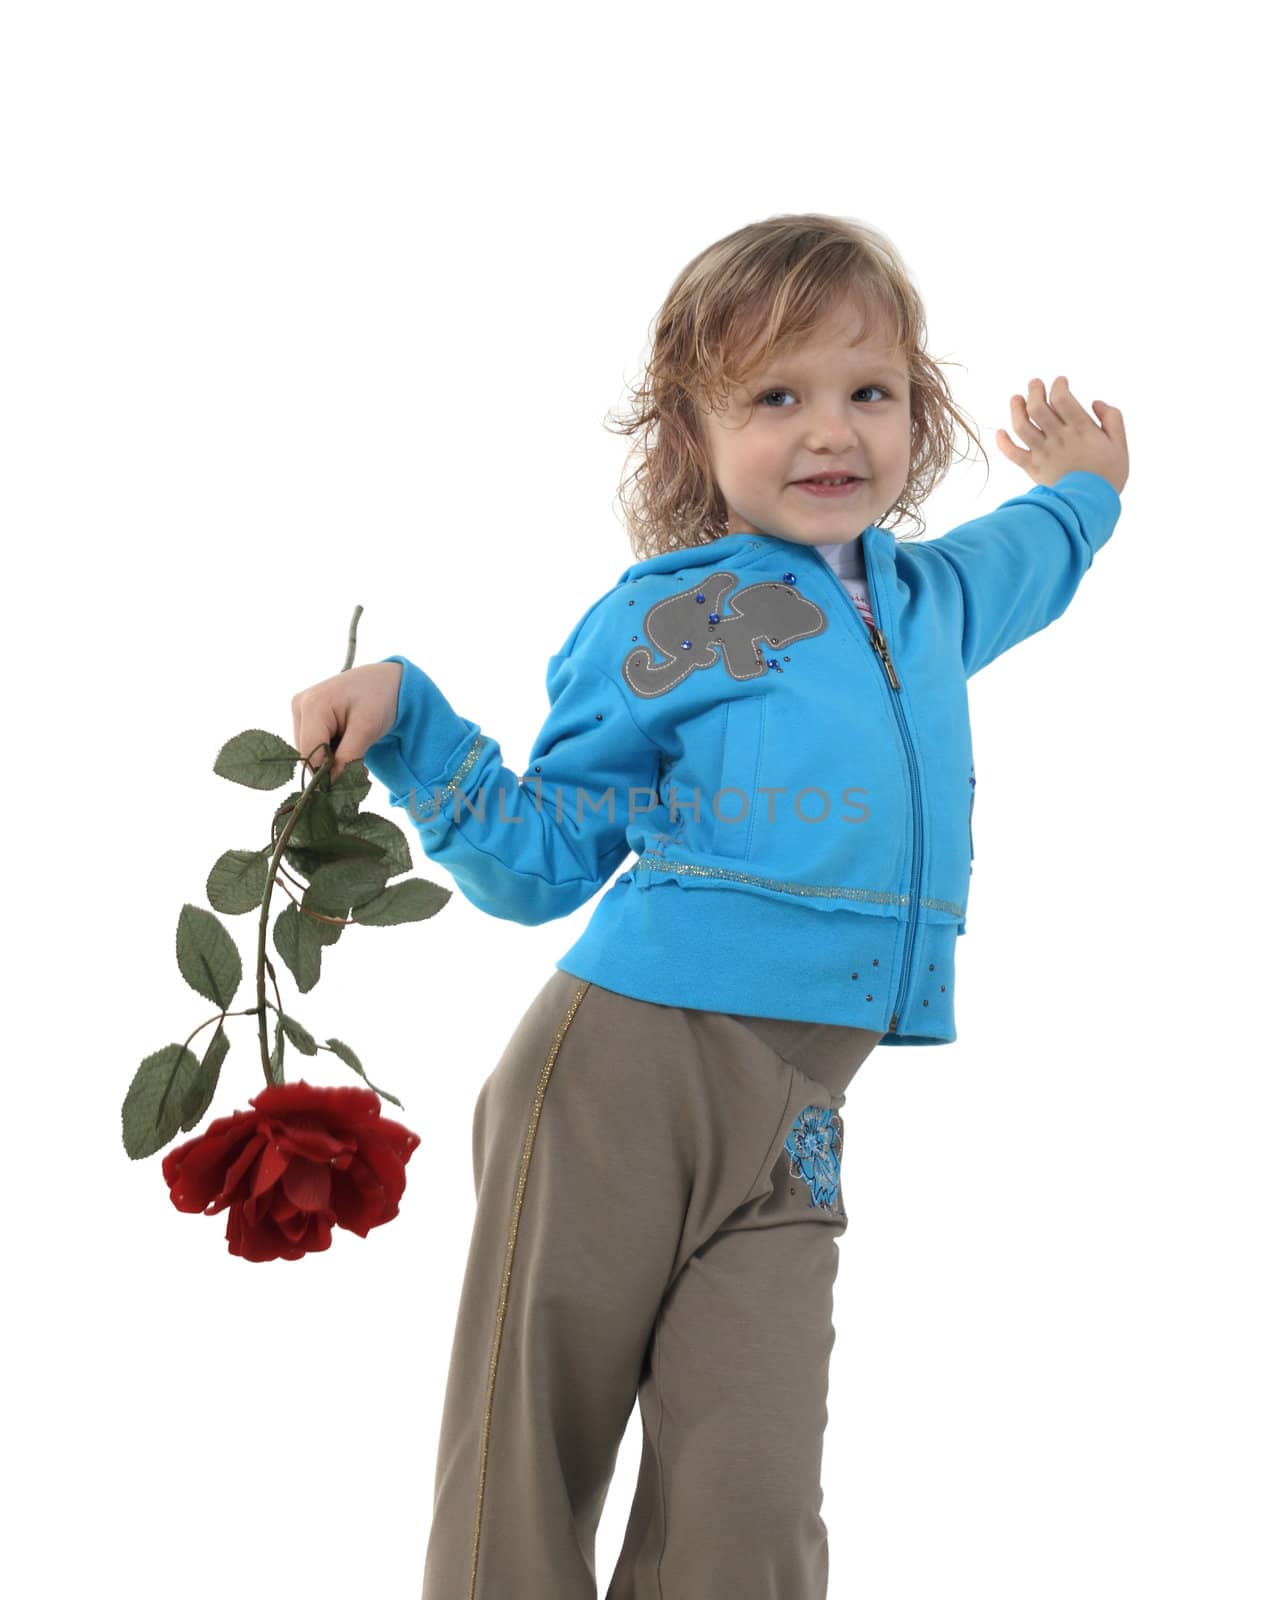 Little girl with a red rose on the white background

